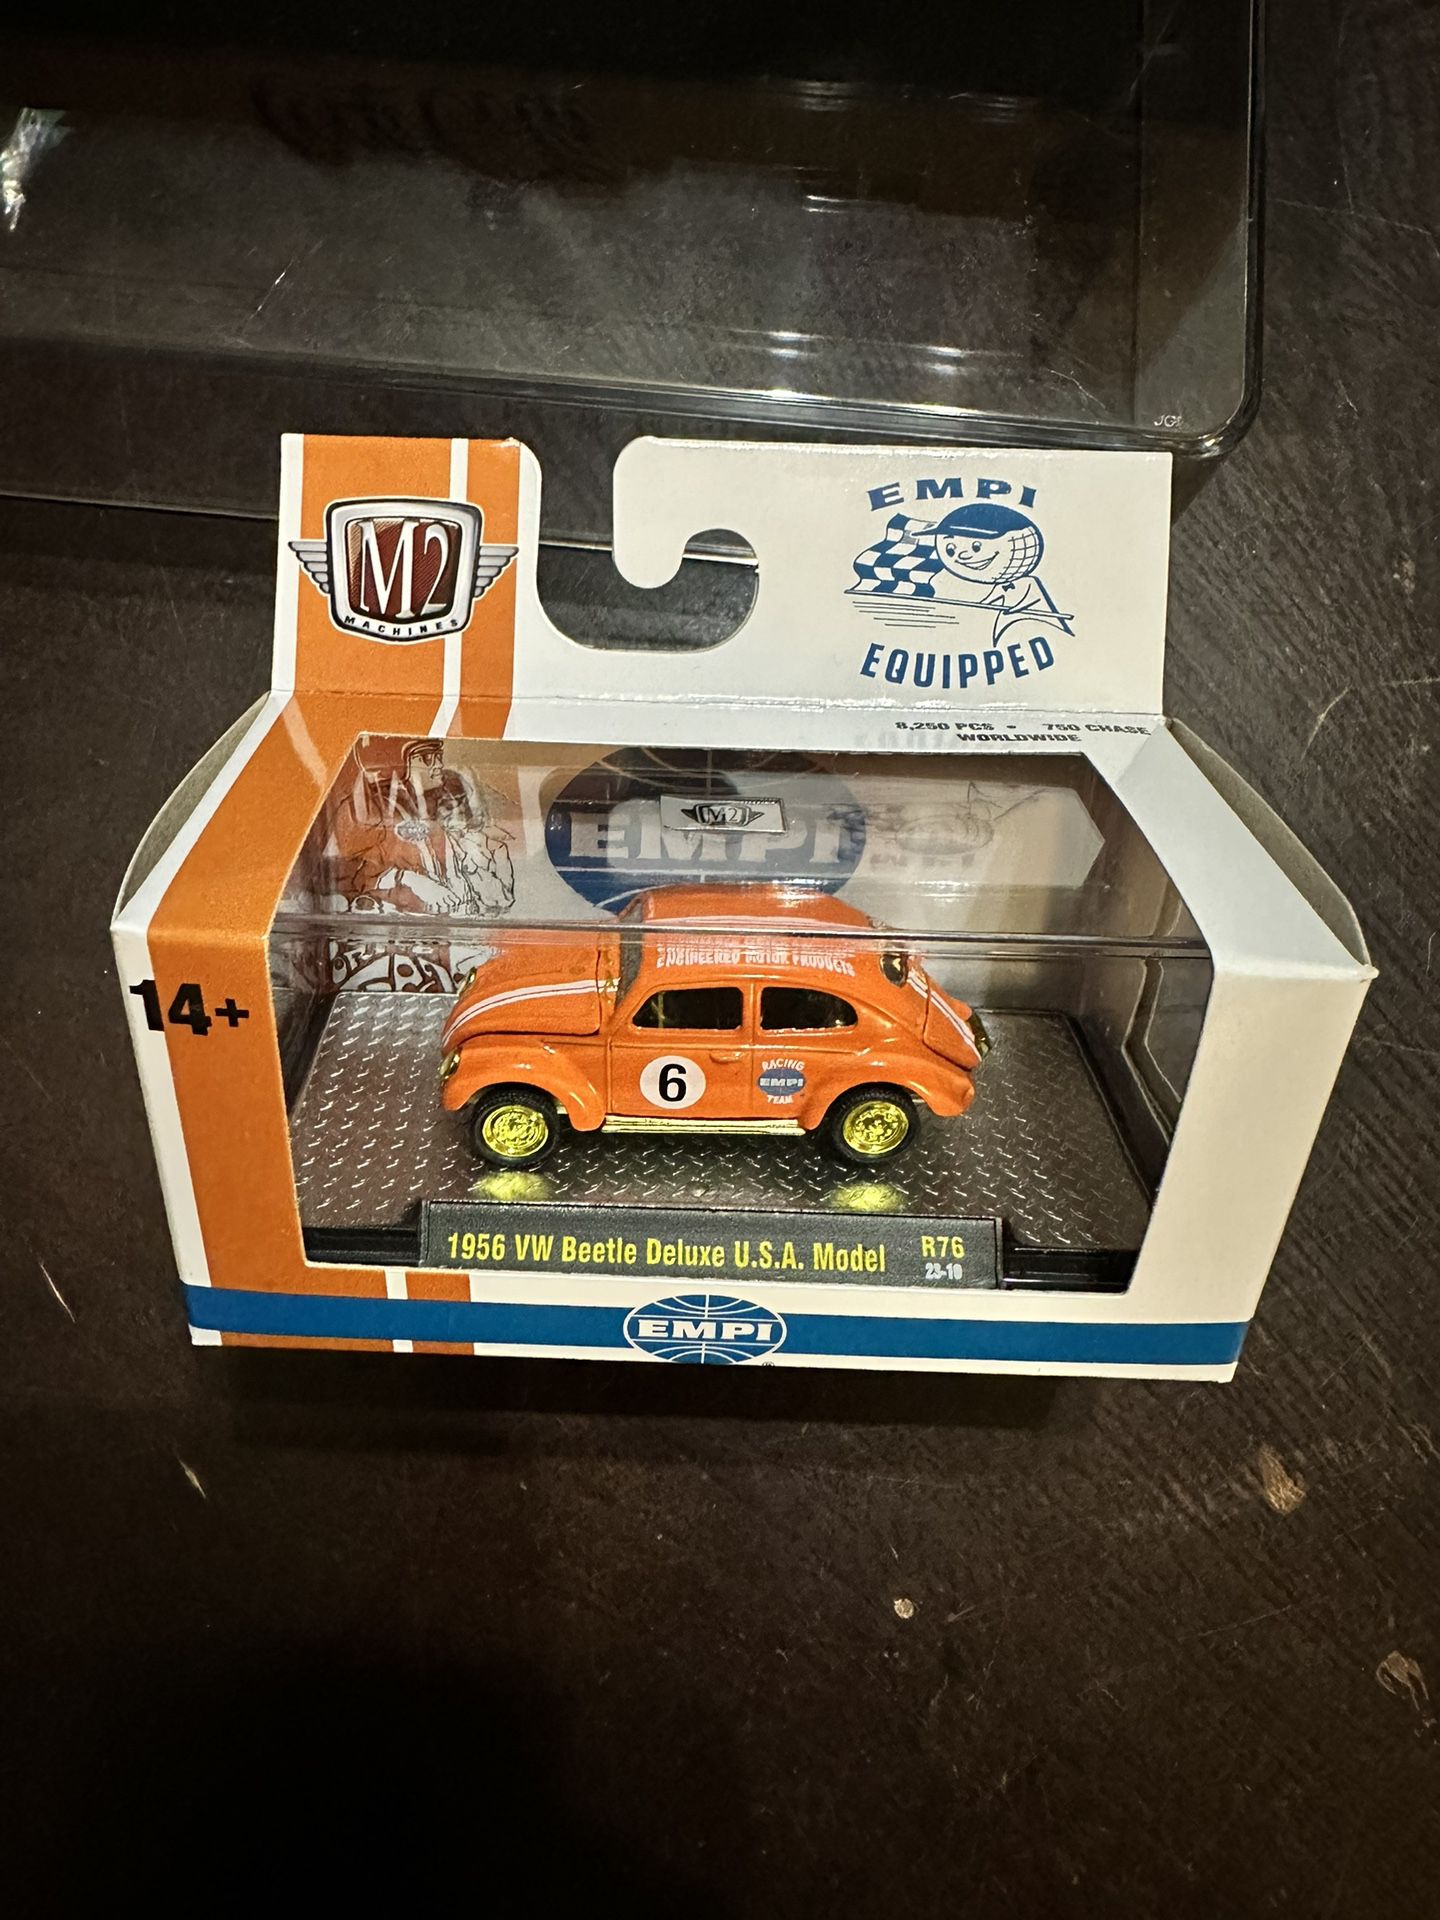 M2 beetle Chase Diecast 